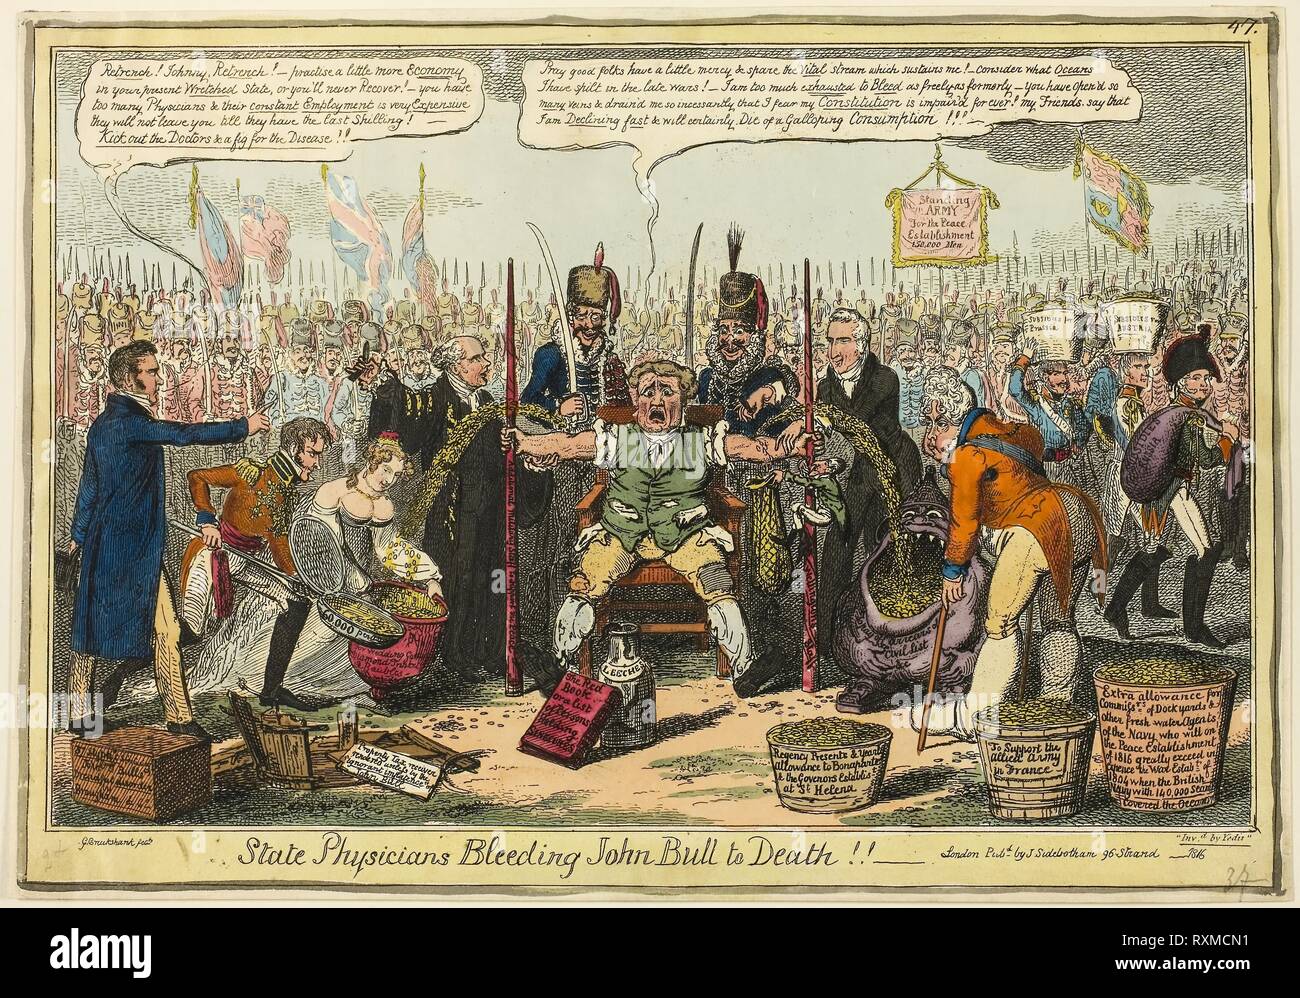 State Physicians Bleeding John Bull to Death!!. George Cruikshank (English, 1792-1878); published by J. Sidebotham (English, active 1802-1820). Date: 1816. Dimensions: 257 × 370 mm (image); 262 × 375 mm (plate); 268 × 380 mm (sheet). Hand-colored etching on paper. Origin: England. Museum: The Chicago Art Institute. Stock Photo